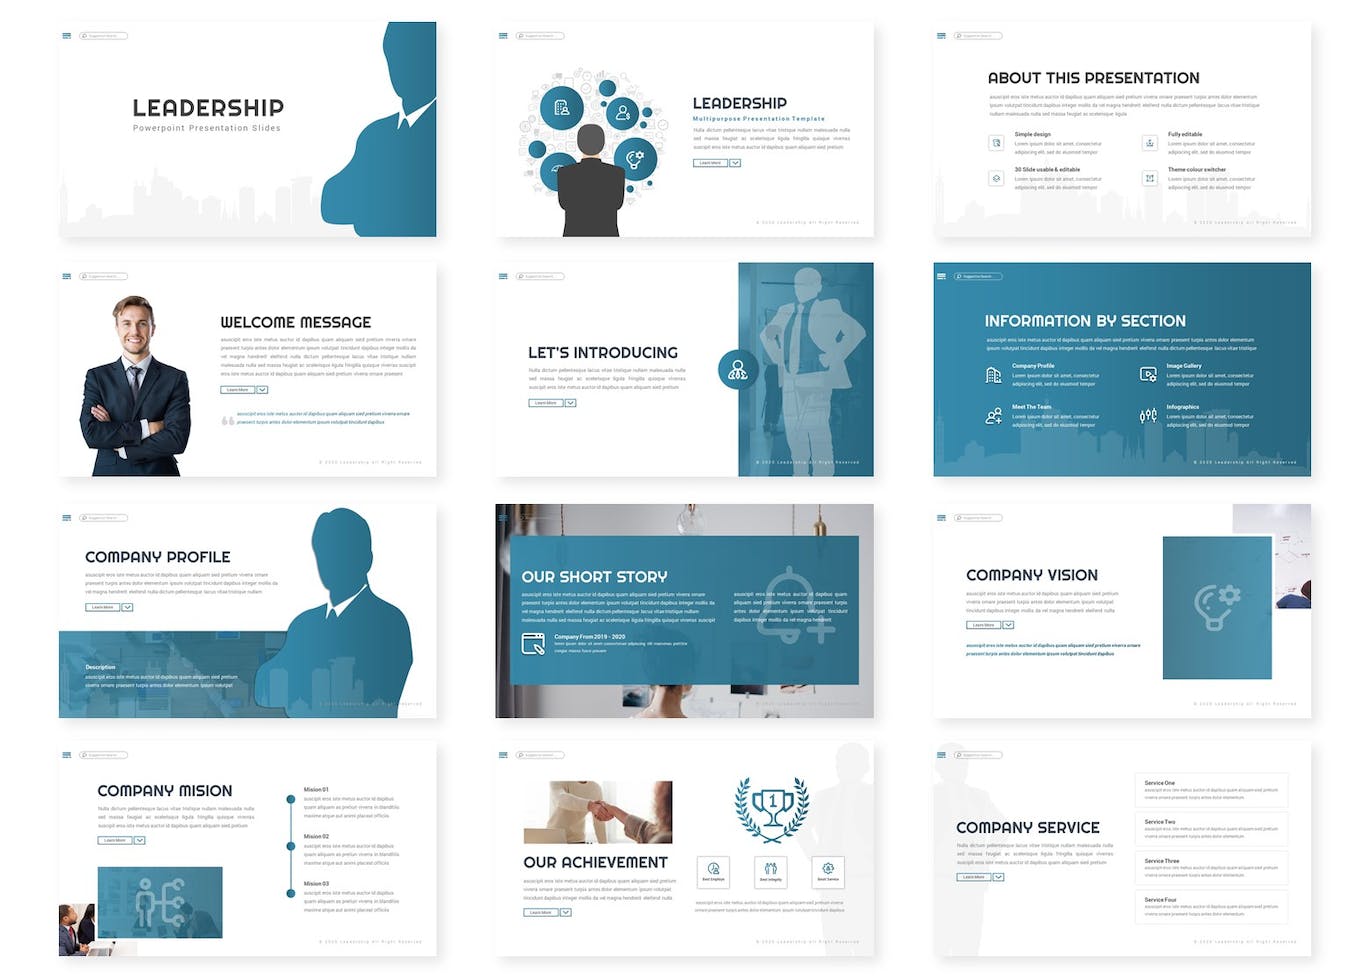 A selection of images of unique slide presentation template on leadership.